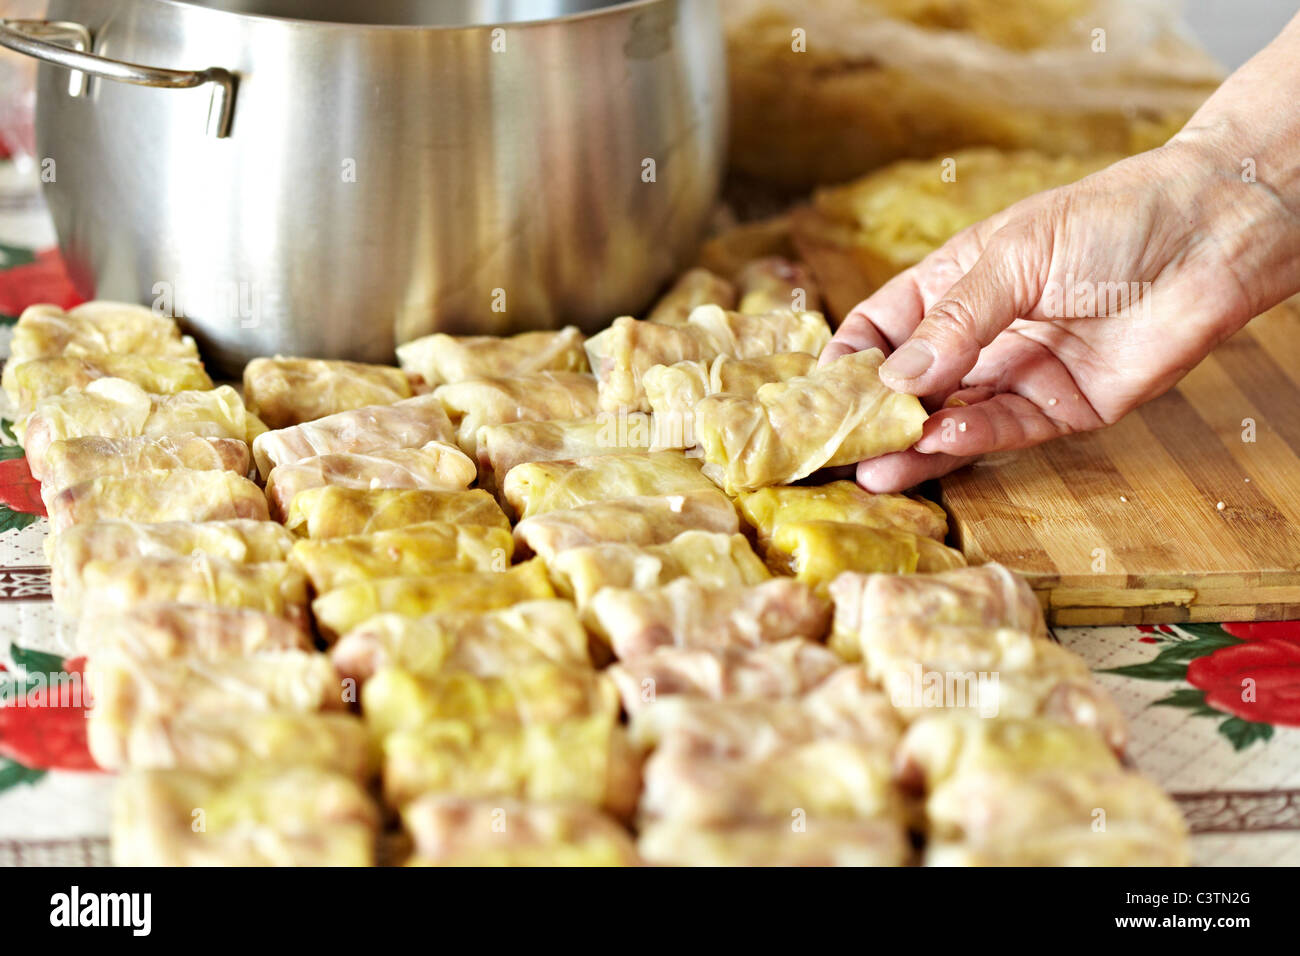 Cooking sarmale, a traditional Romanian dish, with grinded meat and rice wrapped in boiled cabbage leaves Stock Photo